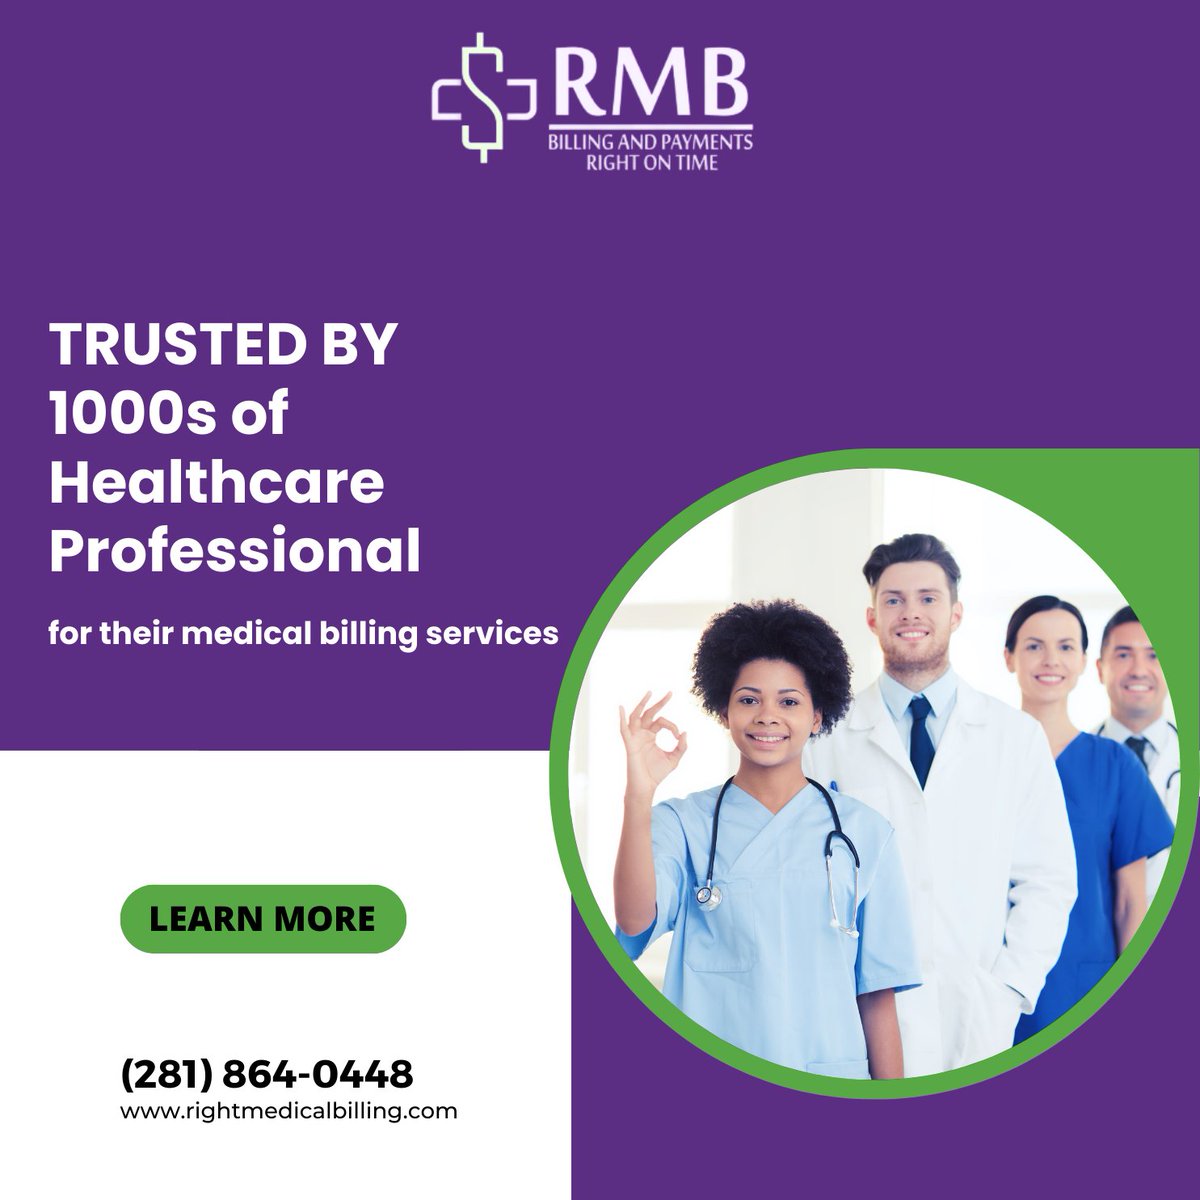 Join the ranks of satisfied healthcare professionals who trust us for their medical billing needs. With a track record of excellence, we're the partner you can rely on for seamless and reliable billing services
#medicalbilling #healthcarefinance #revenuecycle #billingmanagement